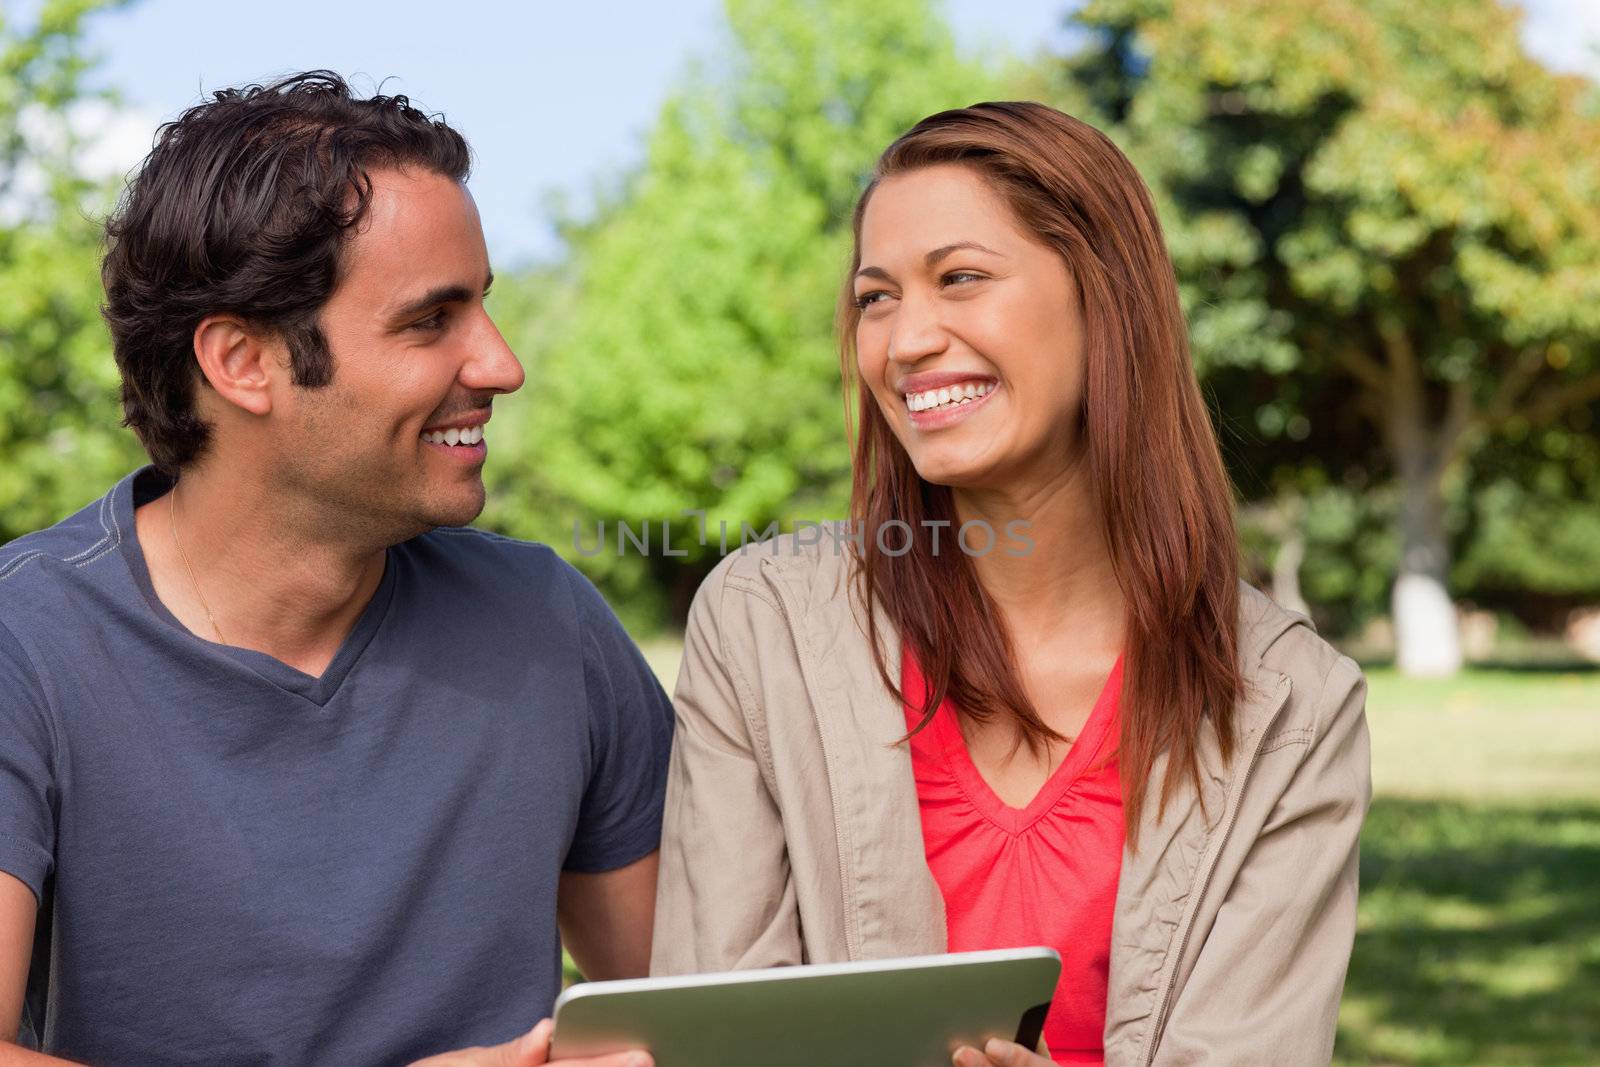 Woman looking at her friend while she is holding a tablet by Wavebreakmedia